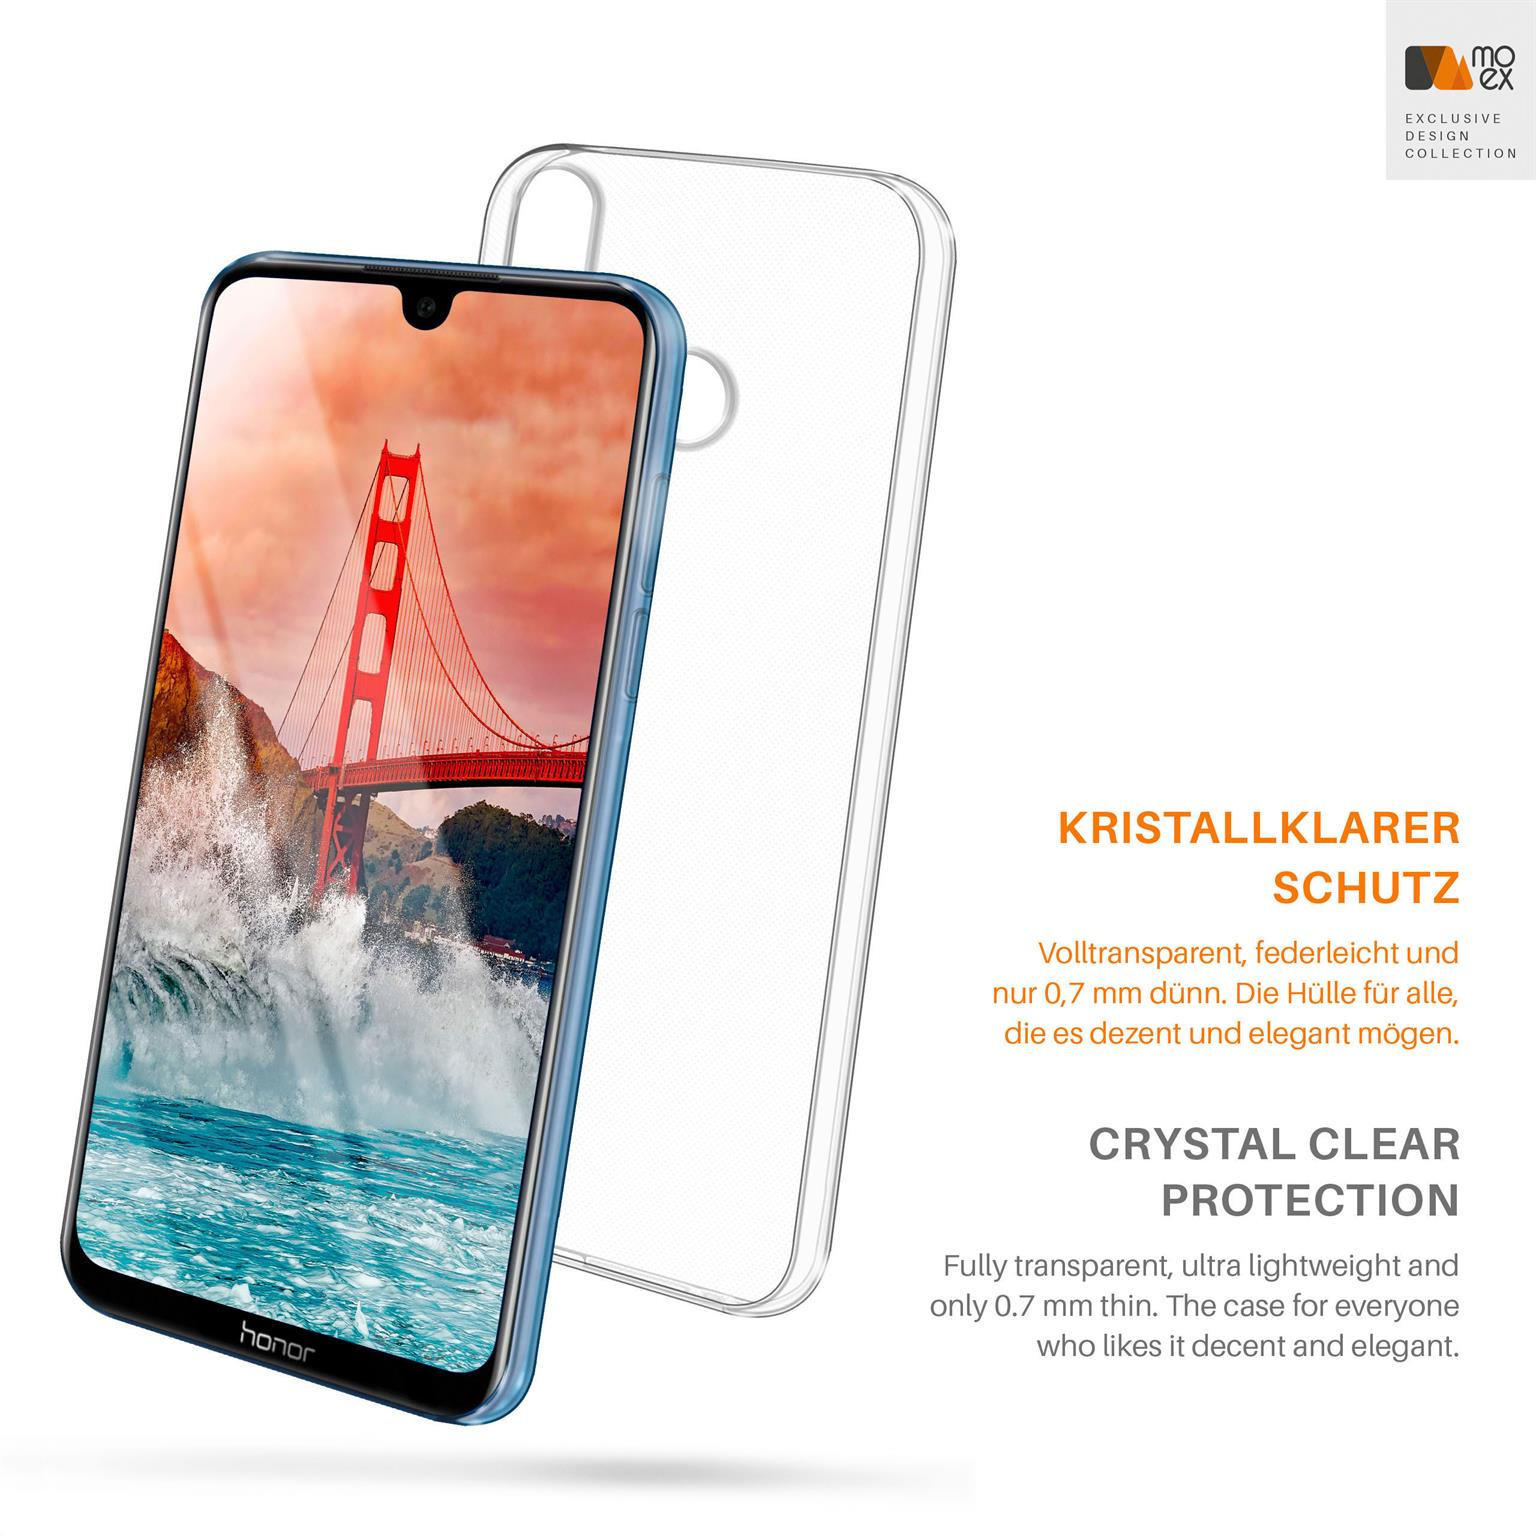 MOEX Aero Case, Backcover, 8X Crystal-Clear Max, Huawei, Honor